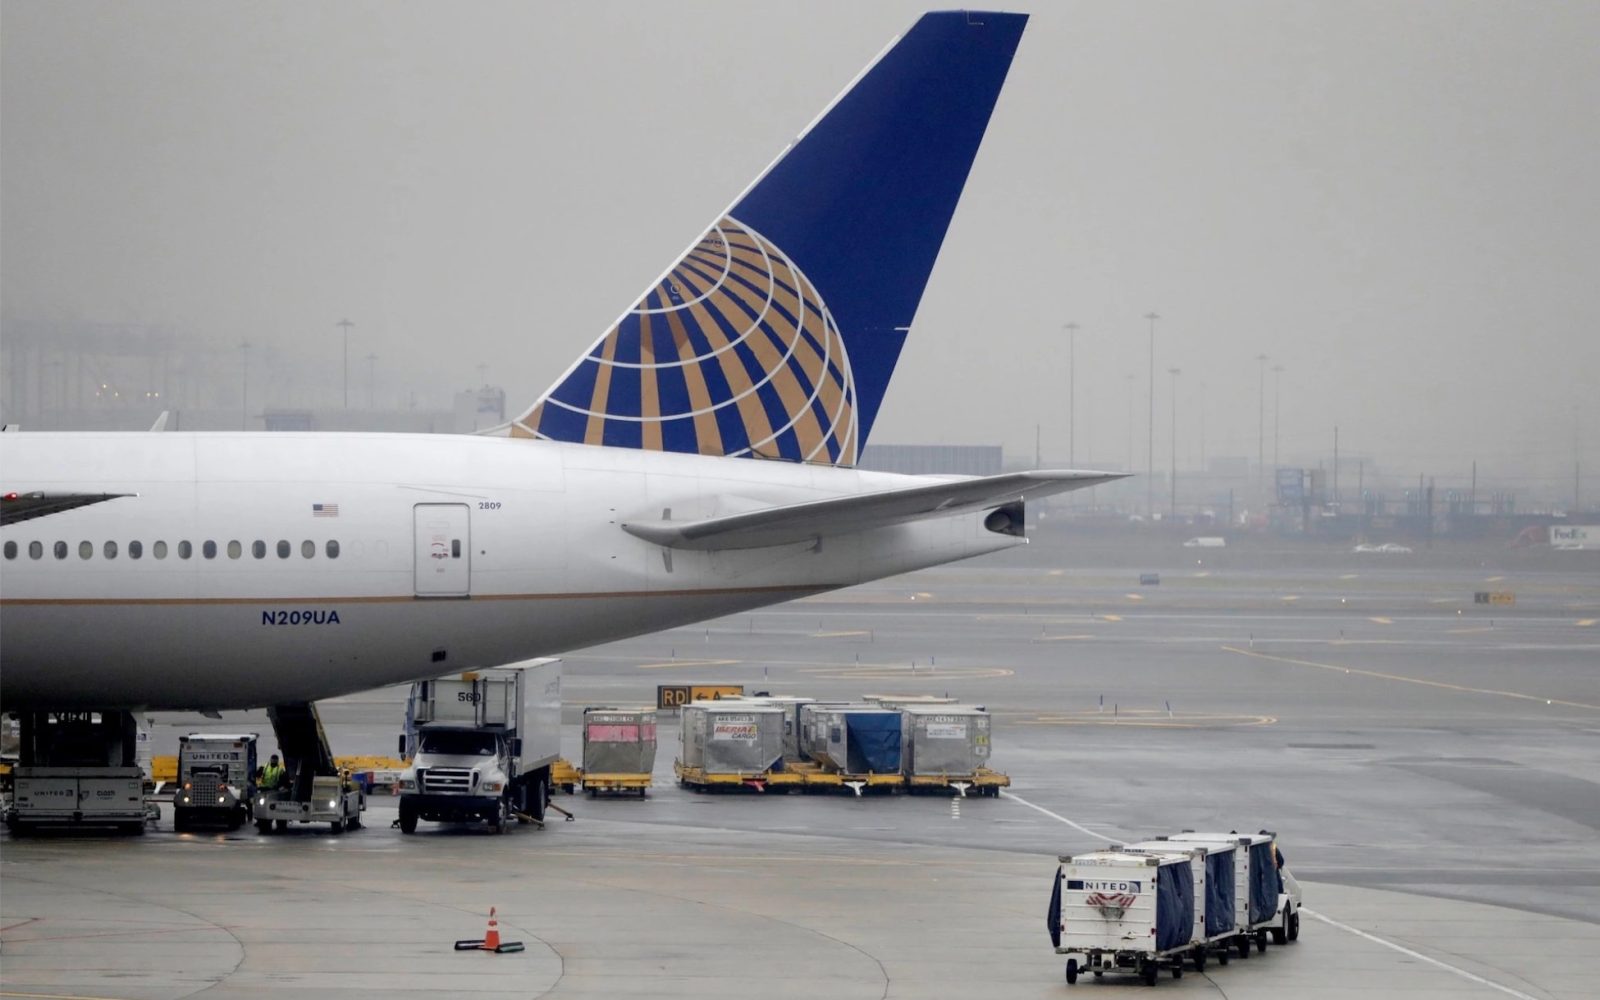 Newark Airport halts flights after two drones were seen close-by